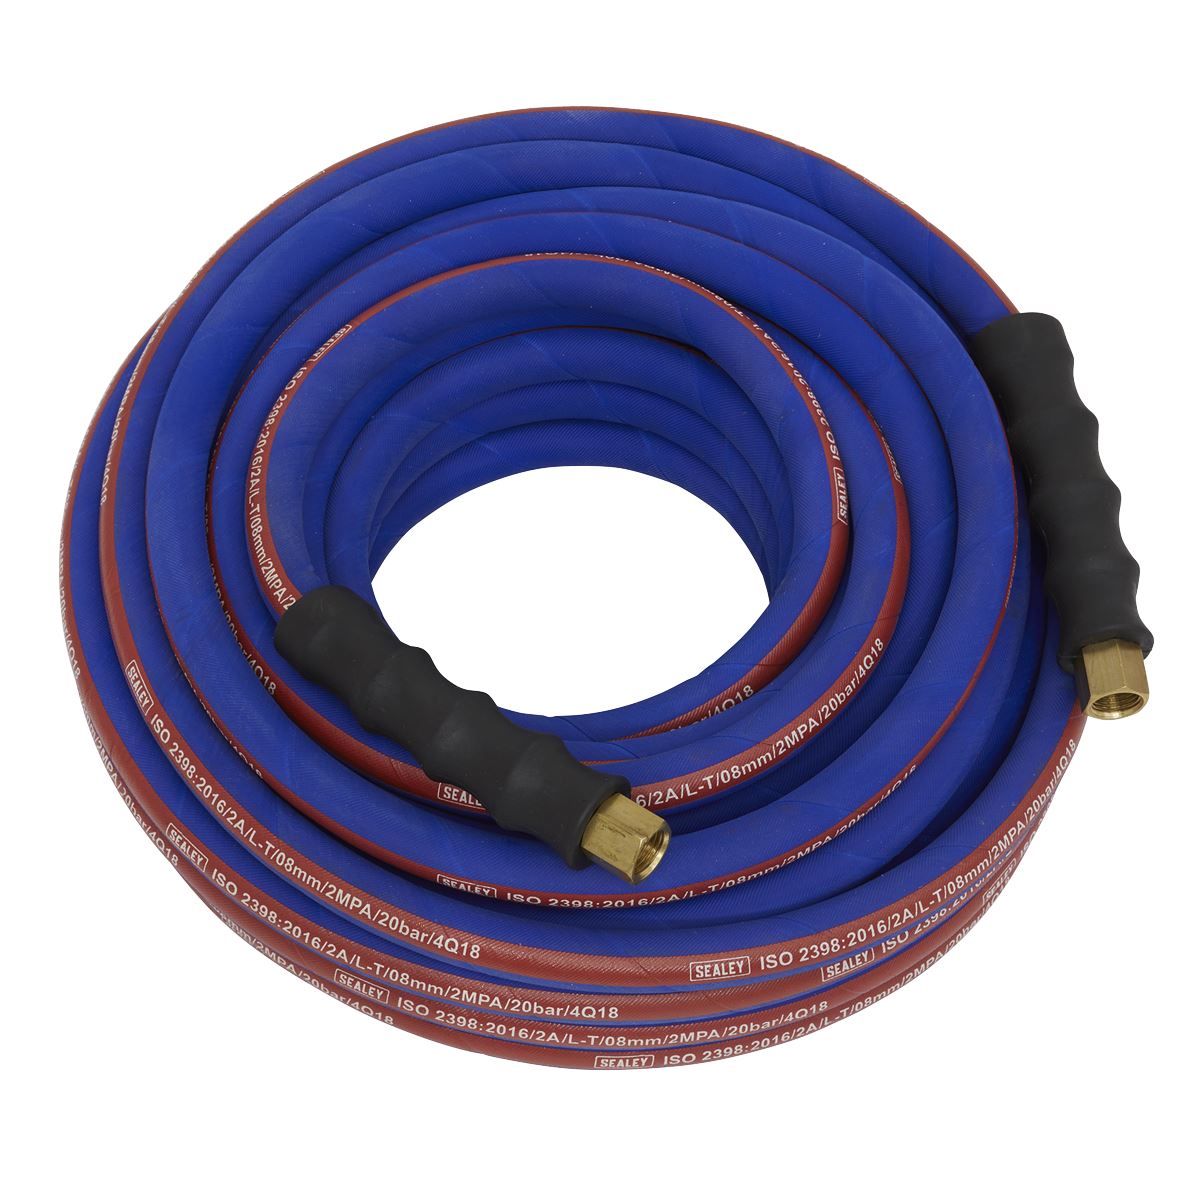 Sealey Air Hose 15m x Ø8mm with 1/4"BSP Unions Extra-Heavy-Duty